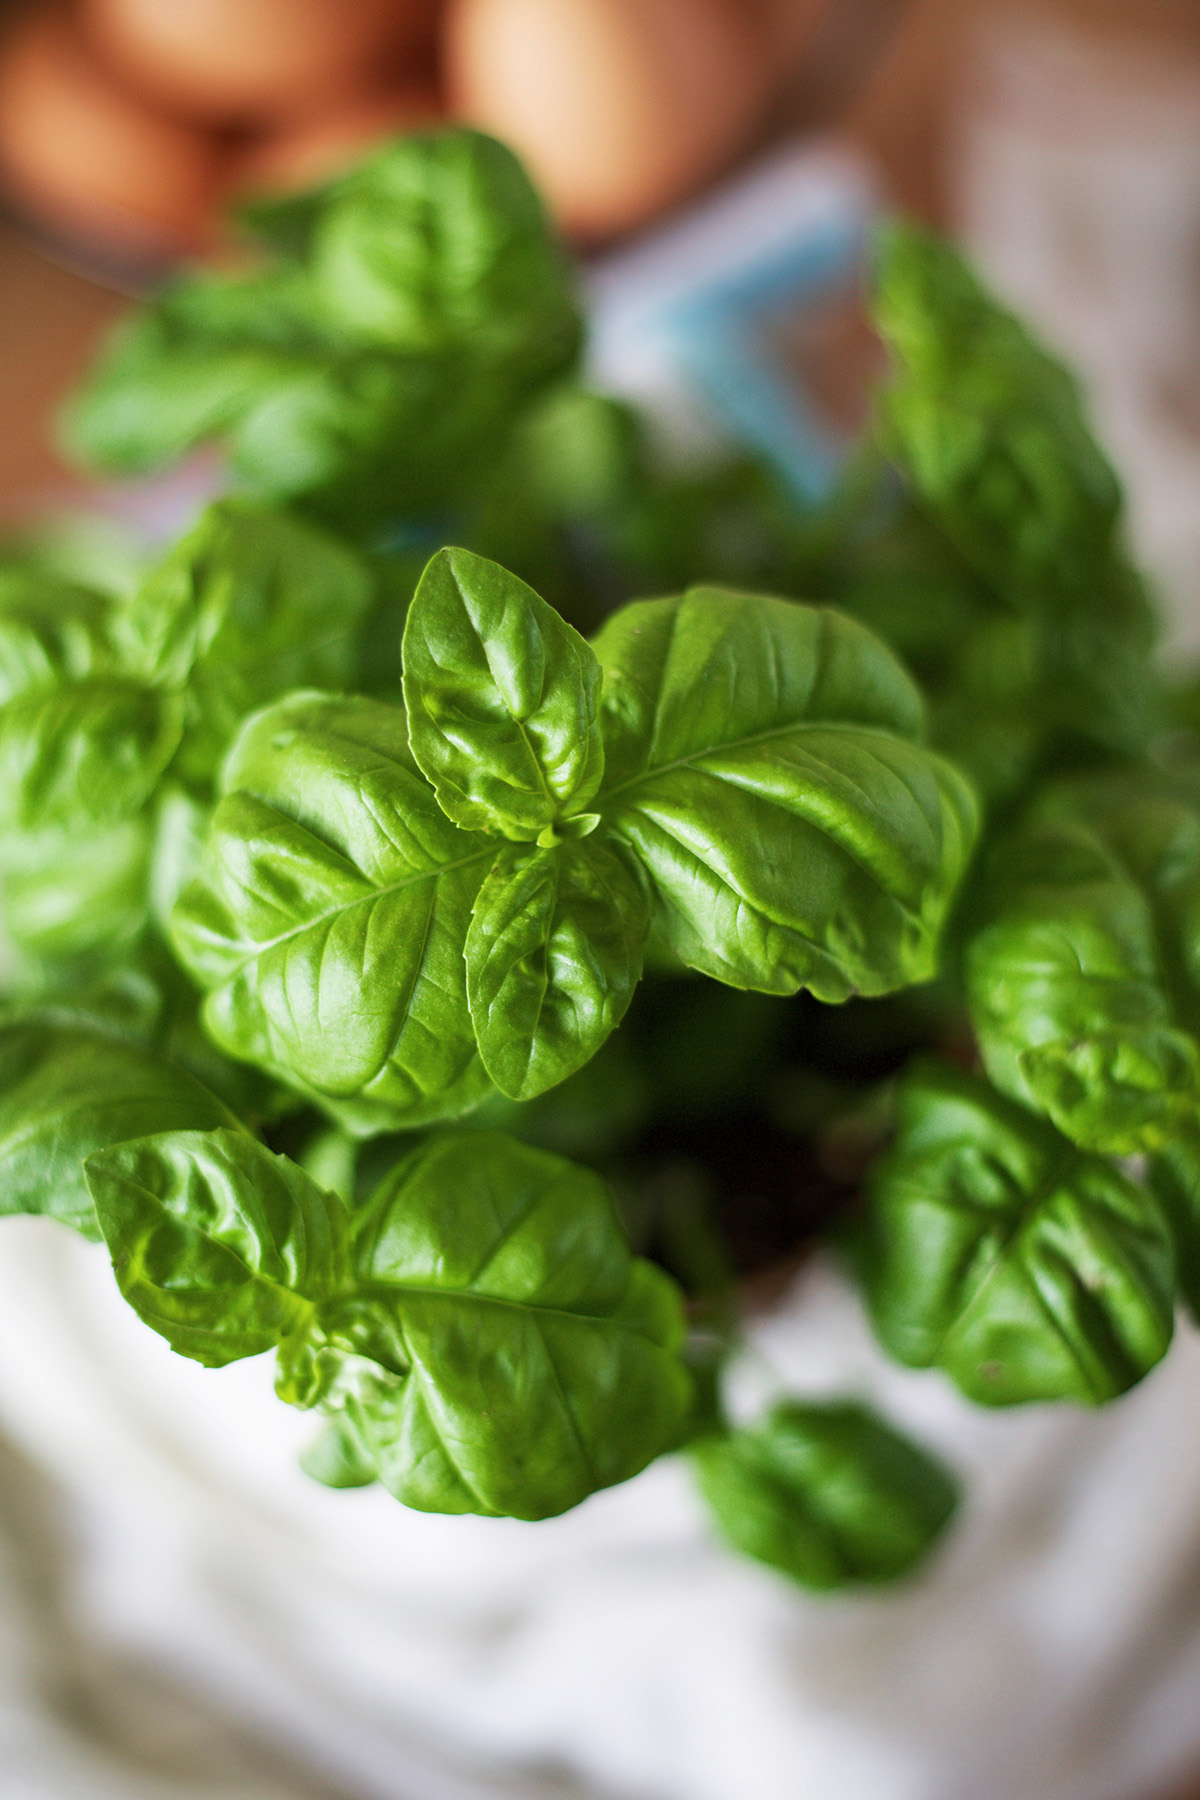 6 Basil Varieties & What You Should Know About Them | Herbal Academy | Did you know there are many basil varieties that can be planted and used in various ways? Come learn about six of them and how to incorporate them into your life.